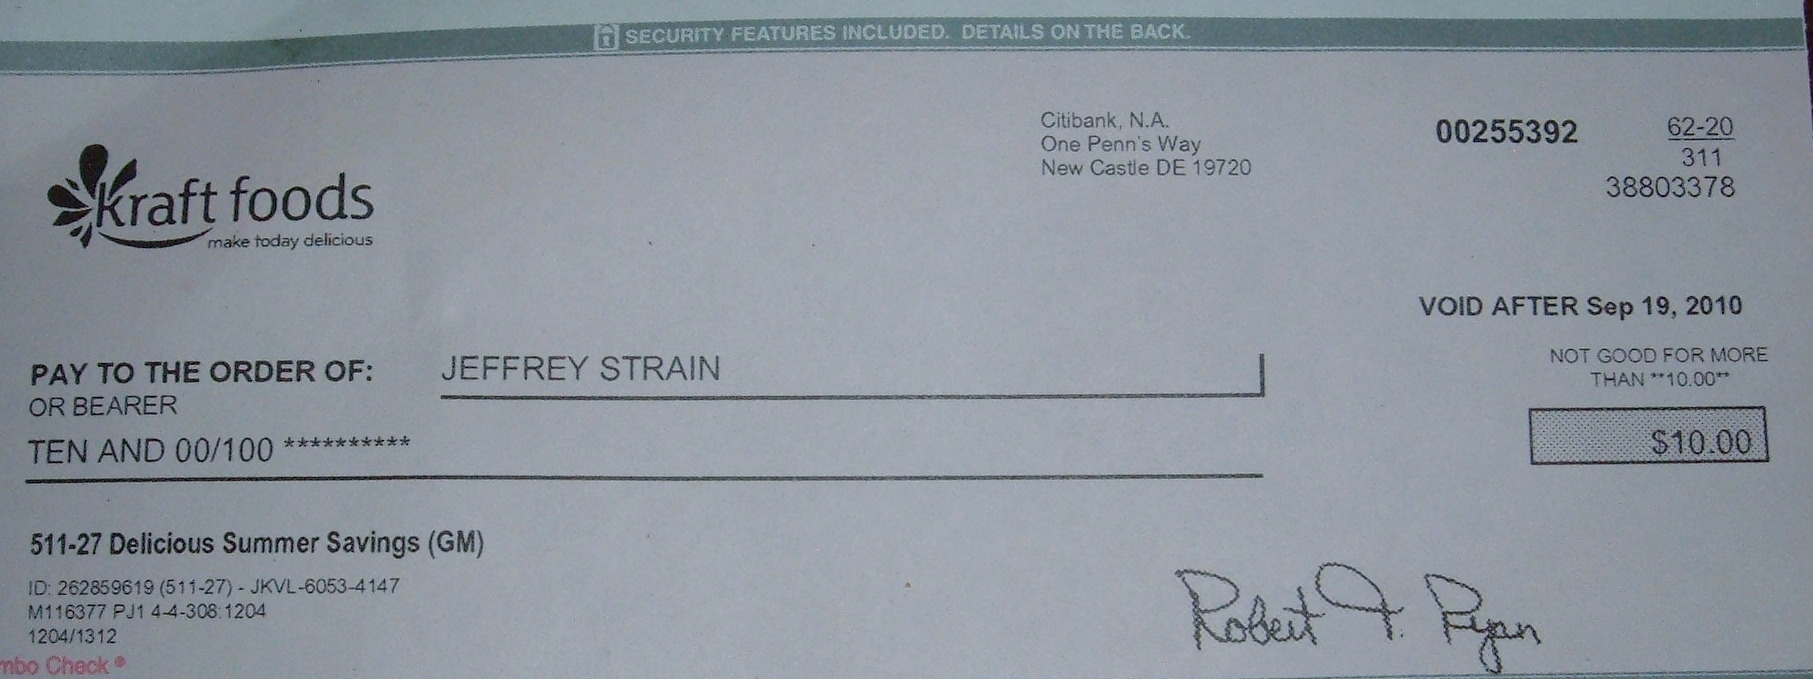 that-darned-rebate-check-dr-kenny